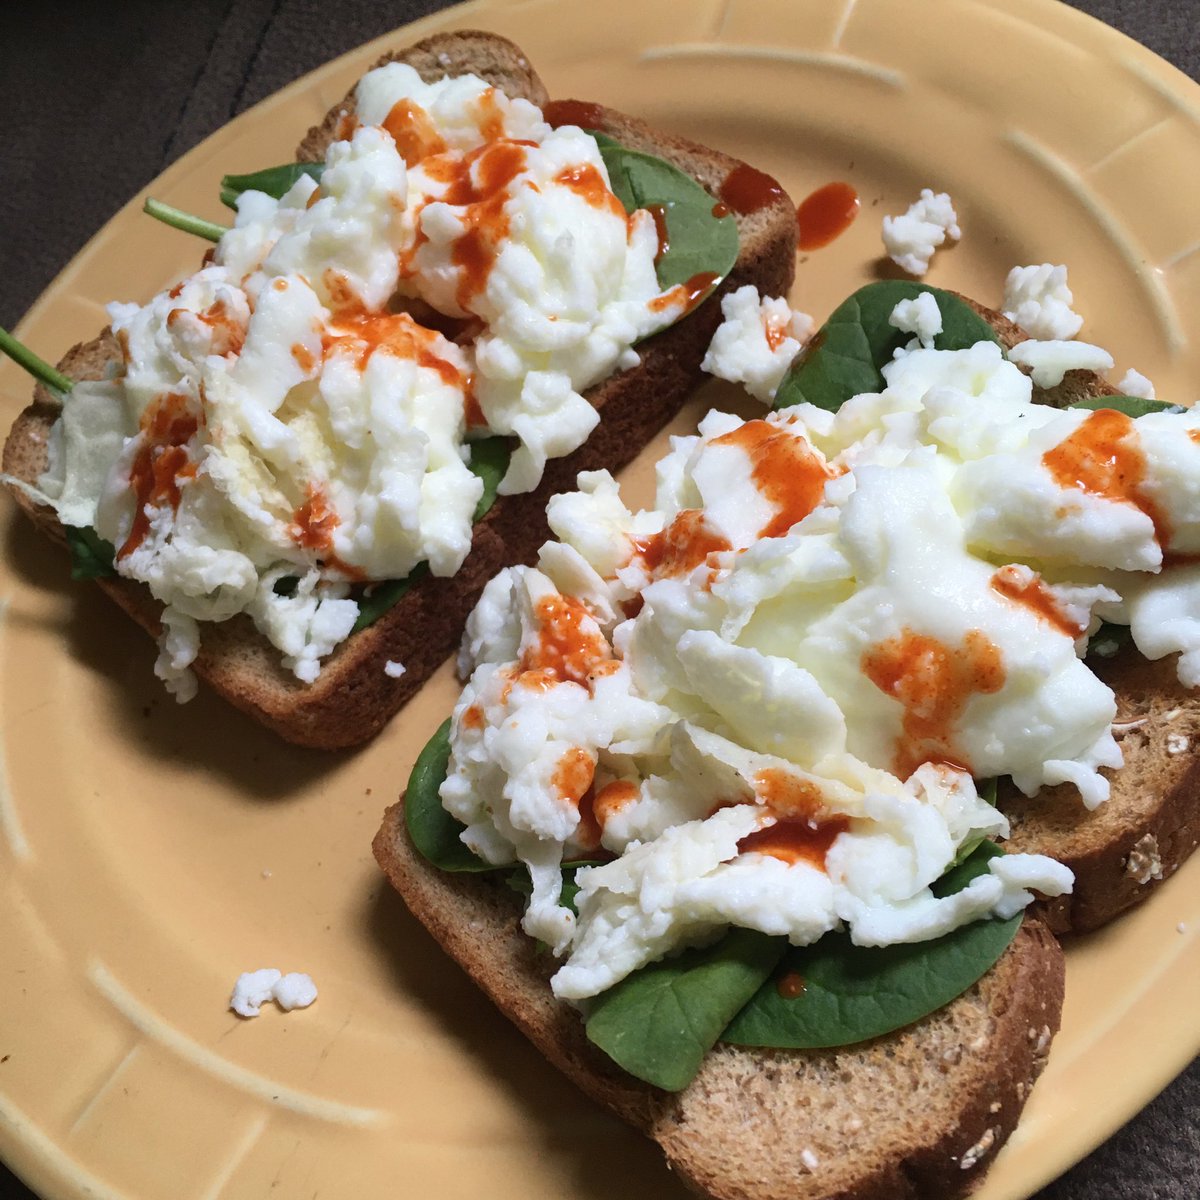 Day 3: One of the first thoughts I had when I woke up this morning was trying to decide if eggs were considered meat or if it was vegetarian acceptable.Turns out eggs are just eggs & I’m a Flexitarian.Breakfast: Eggs whites, spinach, whole wheat toast with Tapatío hot sauce